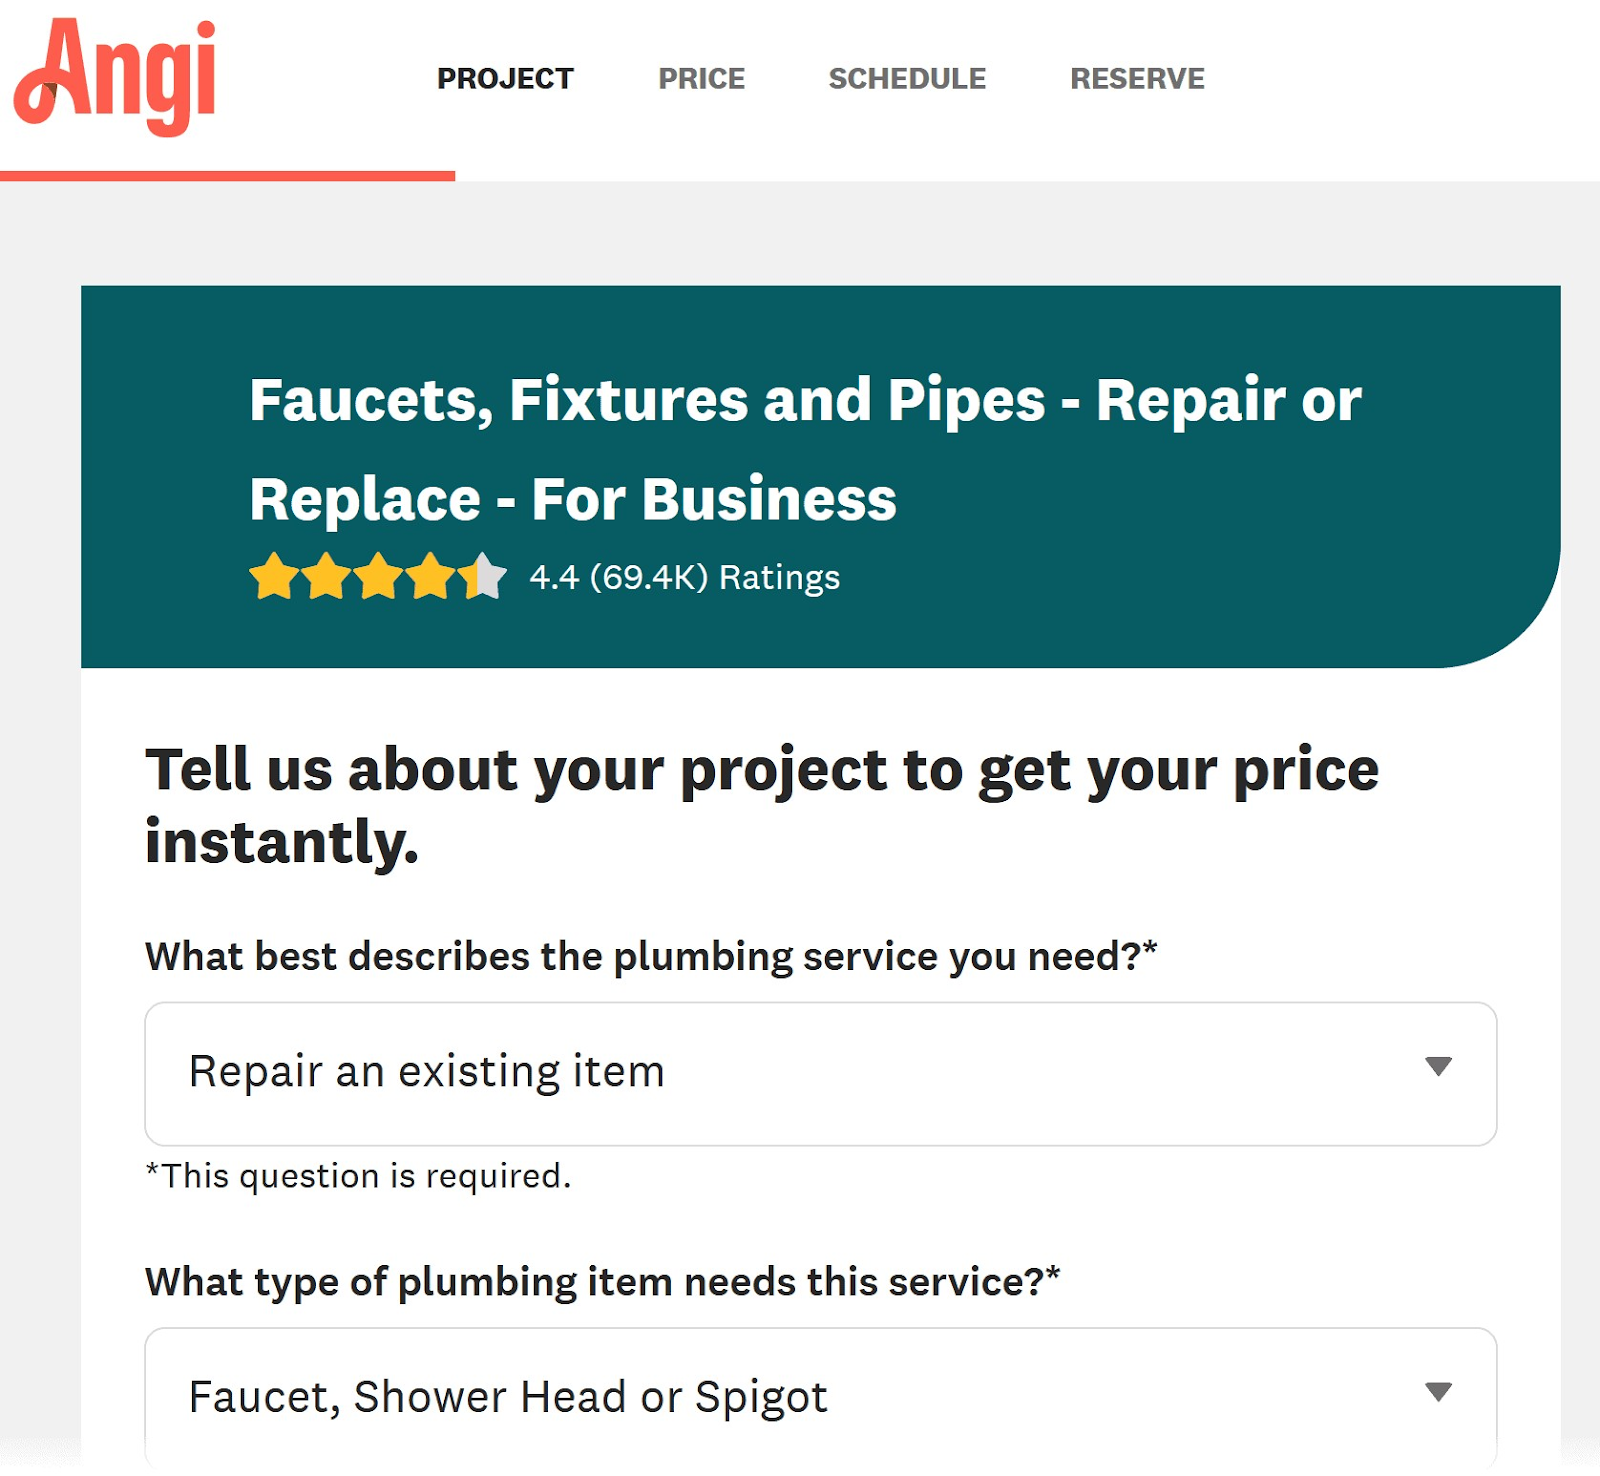 Angi's "Project" page section